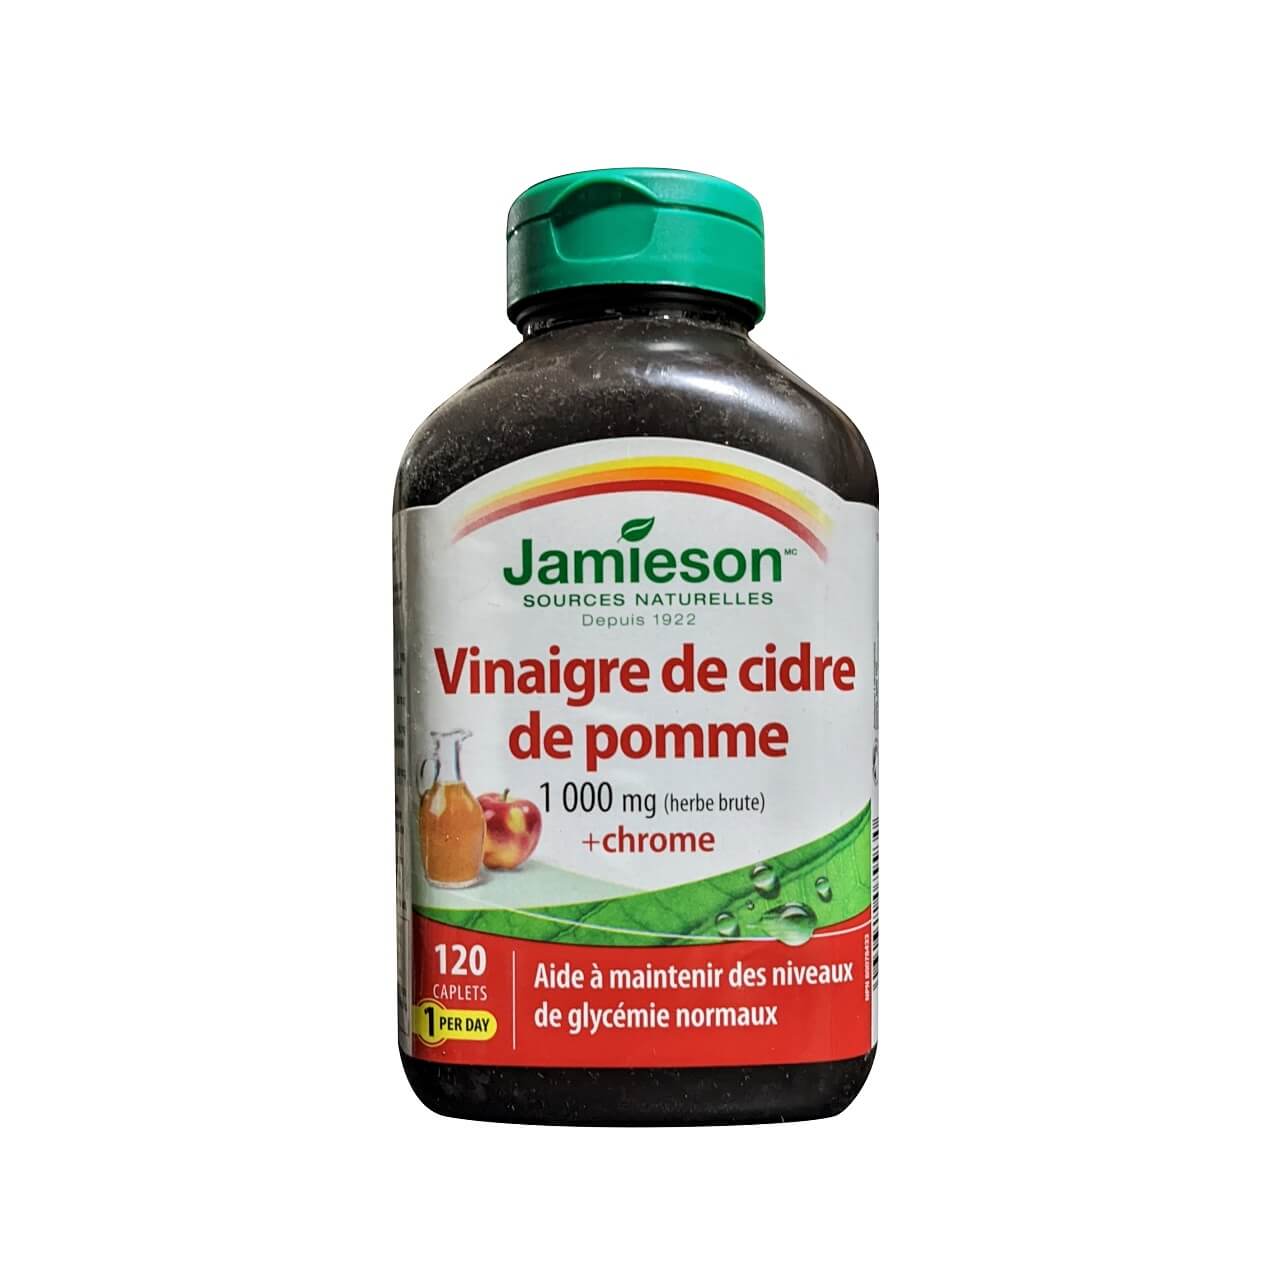 Product label for Jamieson Apple Cider Vinegar 1000 mg with Chromium (120 caplets) in French